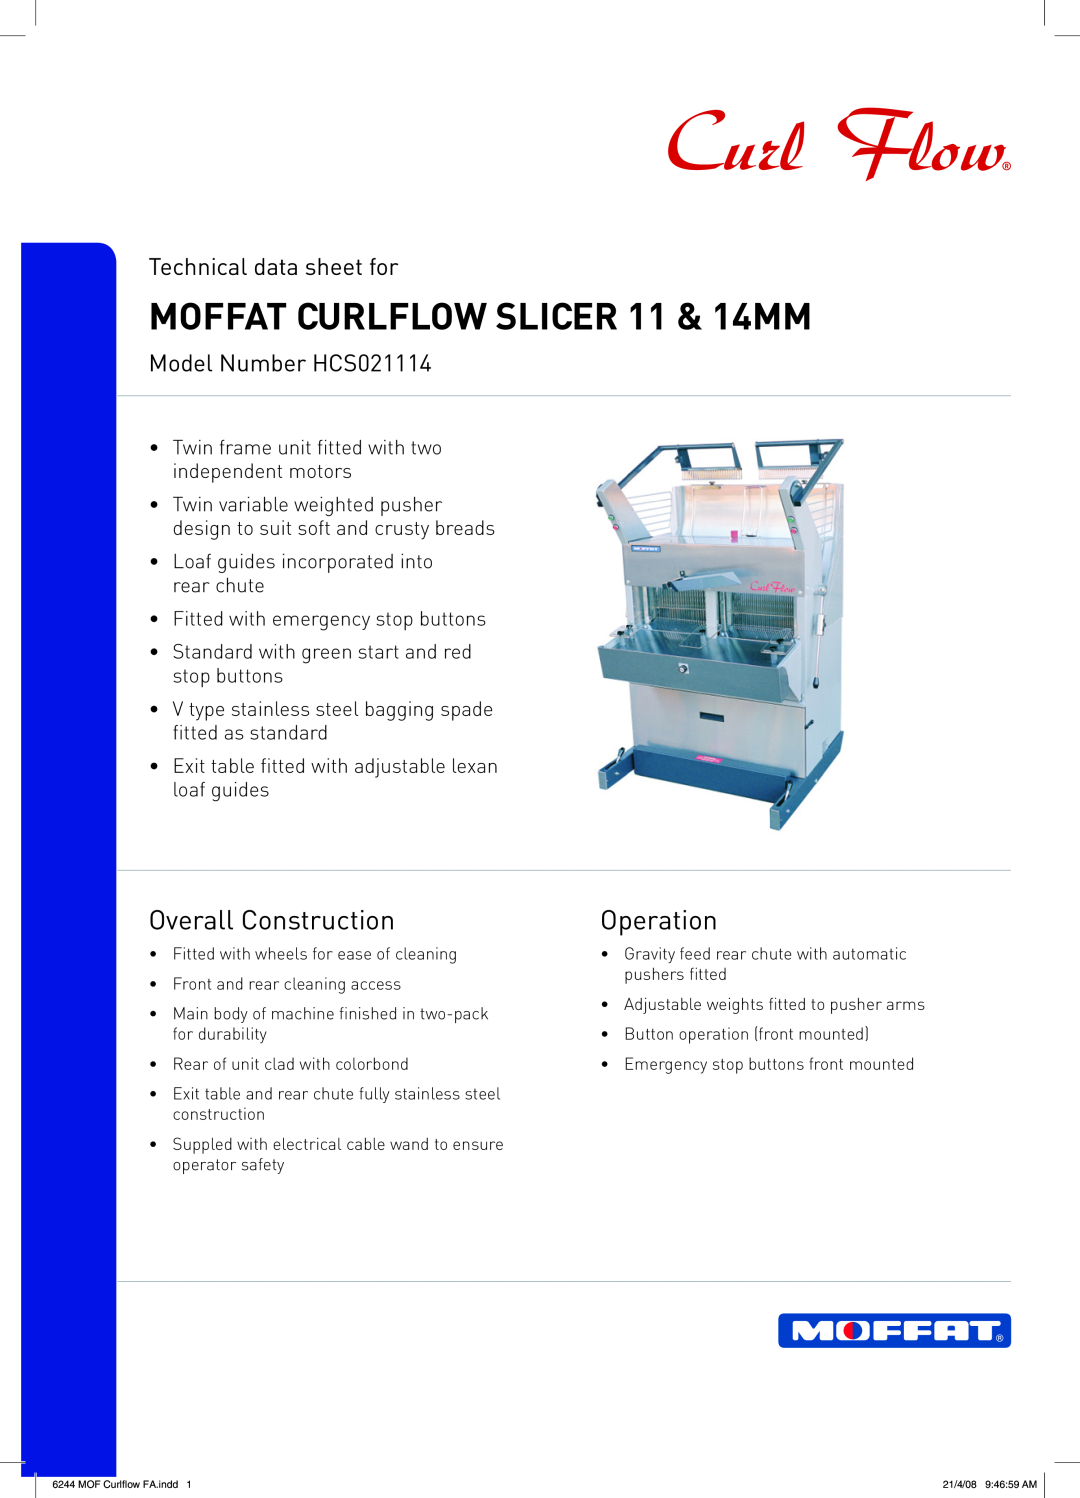 Moffat manual Technical data sheet for, Model Number HCS021114, MOFFAT CURLFLOW SLICER 11 & 14MM, Overall Construction 